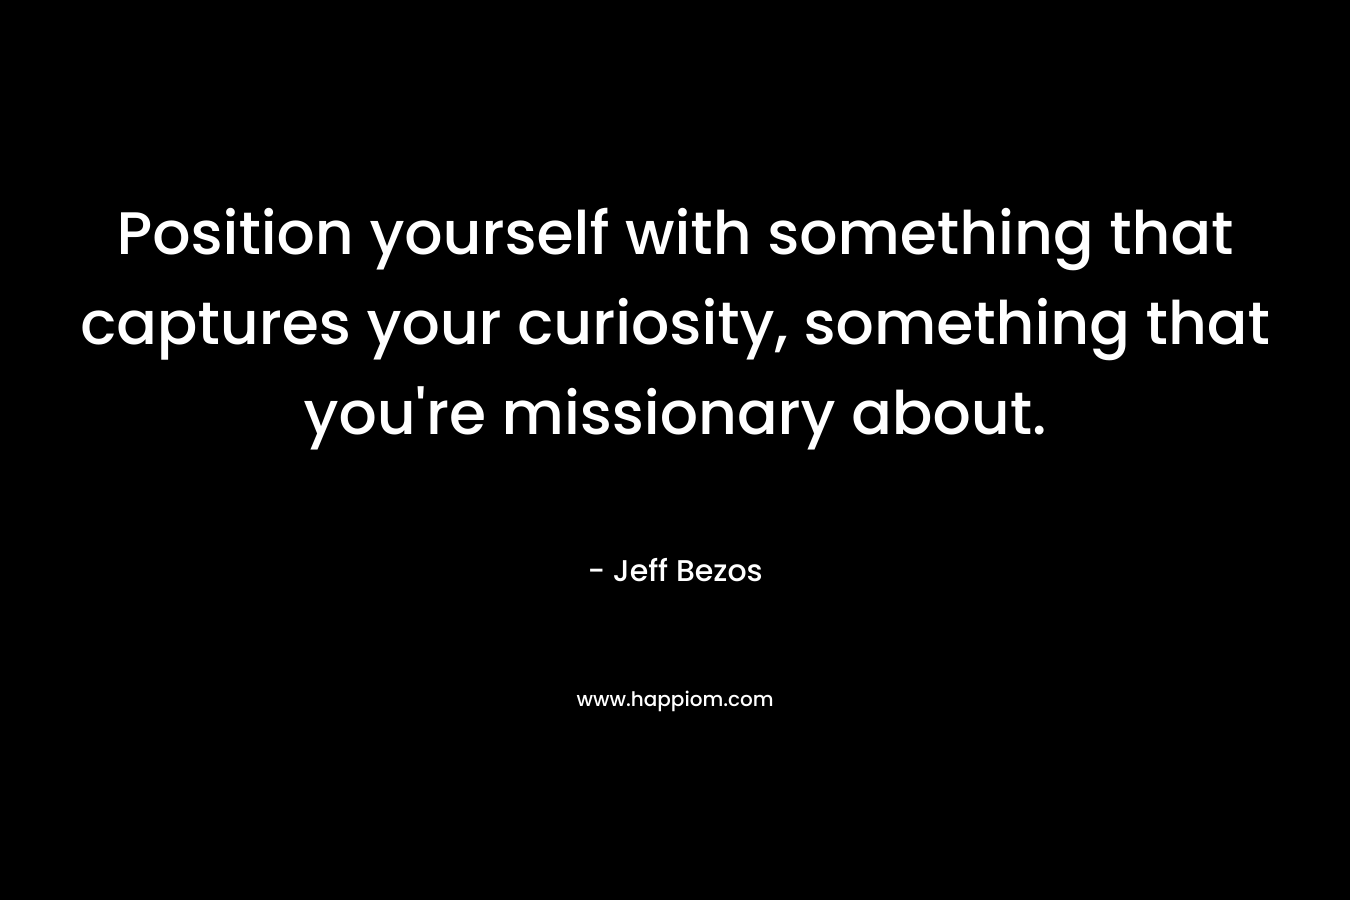 Position yourself with something that captures your curiosity, something that you're missionary about.